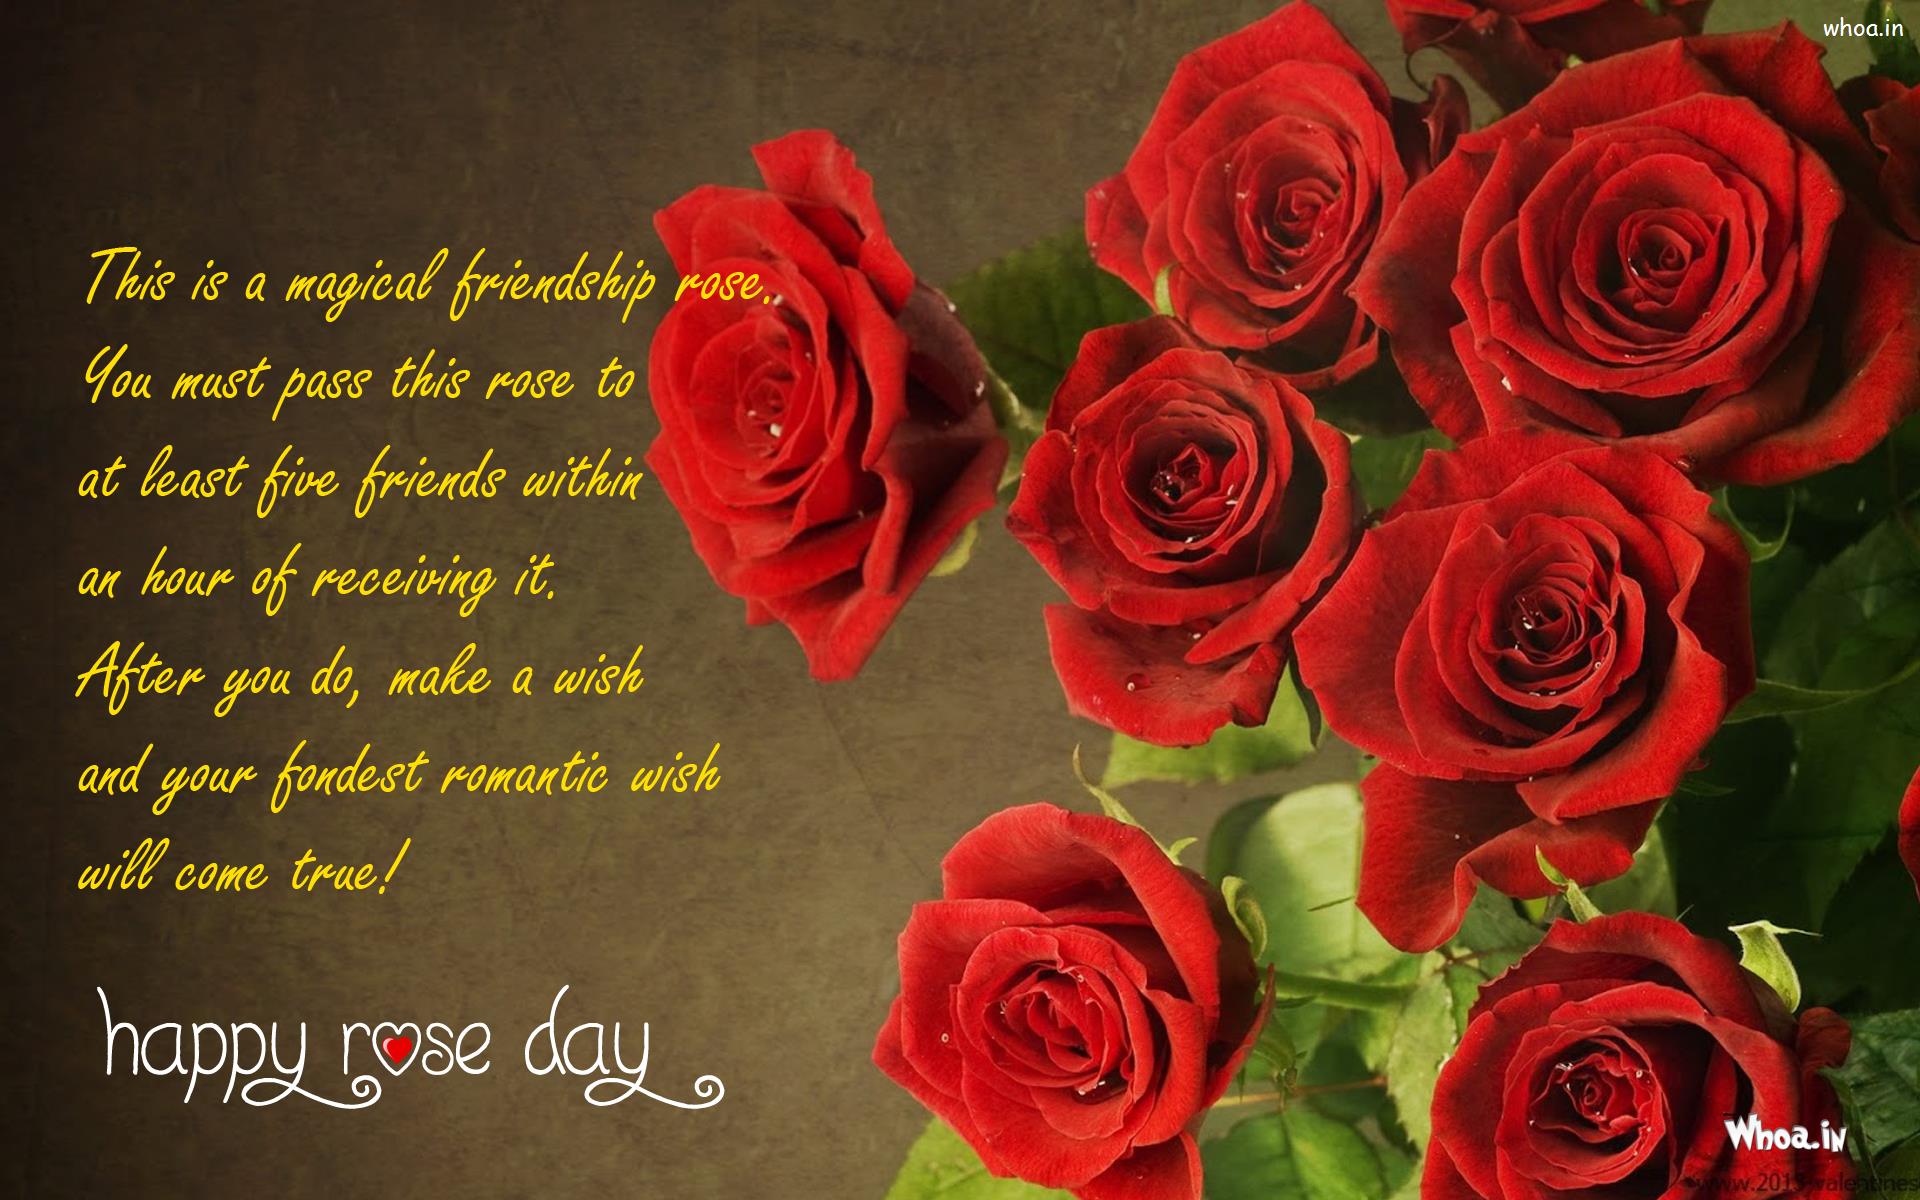 In Images Zone - Romantic Rose Day Quotes - HD Wallpaper 